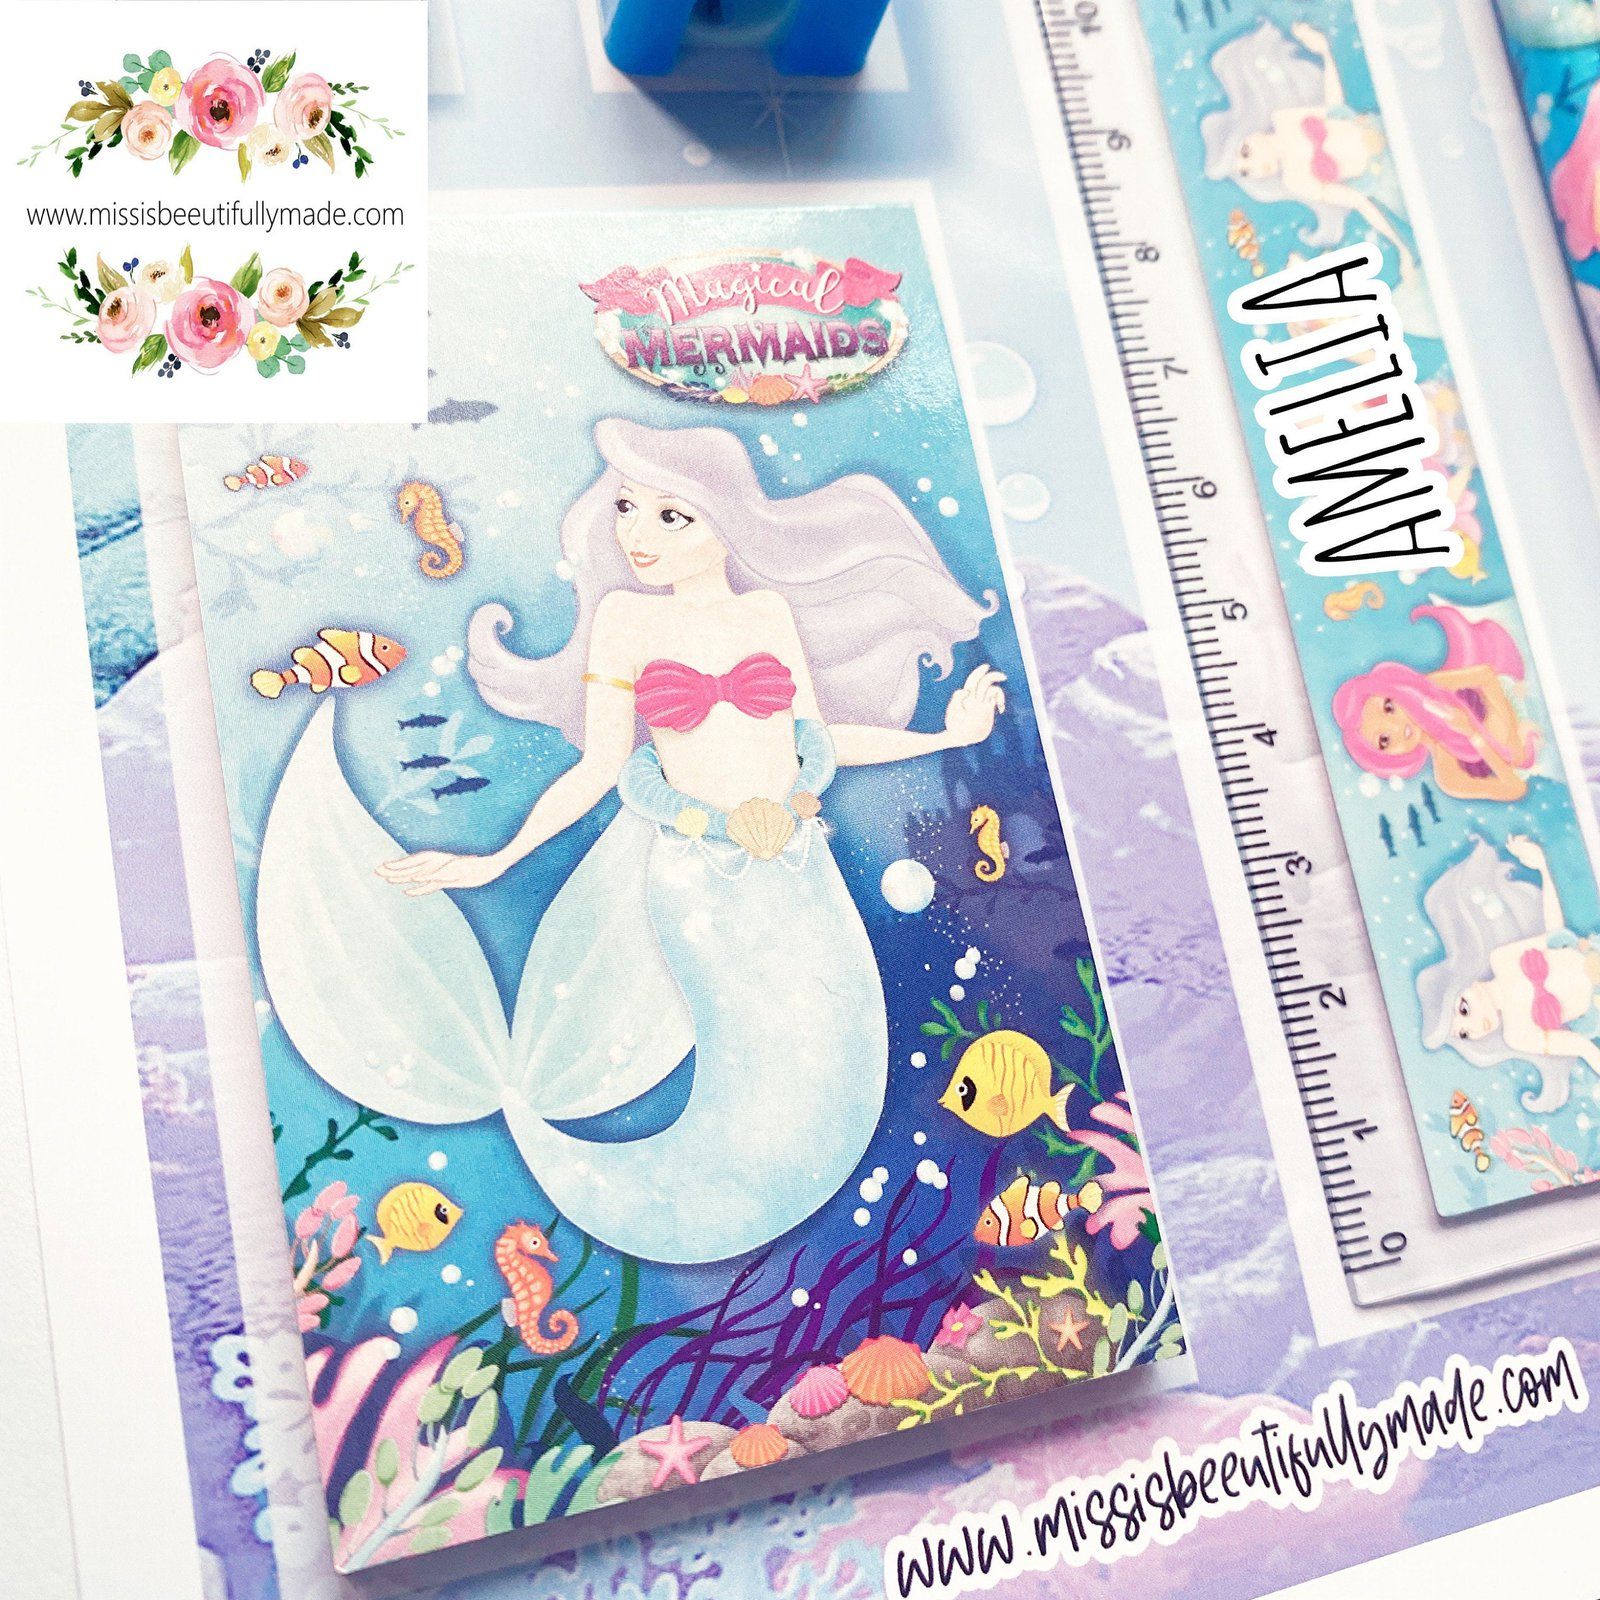 Personalised Children's stationery set in a mermaid, under the sea design. The contents are, rubber, sharpener, notepad, ruler & pencil. All complete on a personalised backing card. The ruler is also personalised with Childs name.